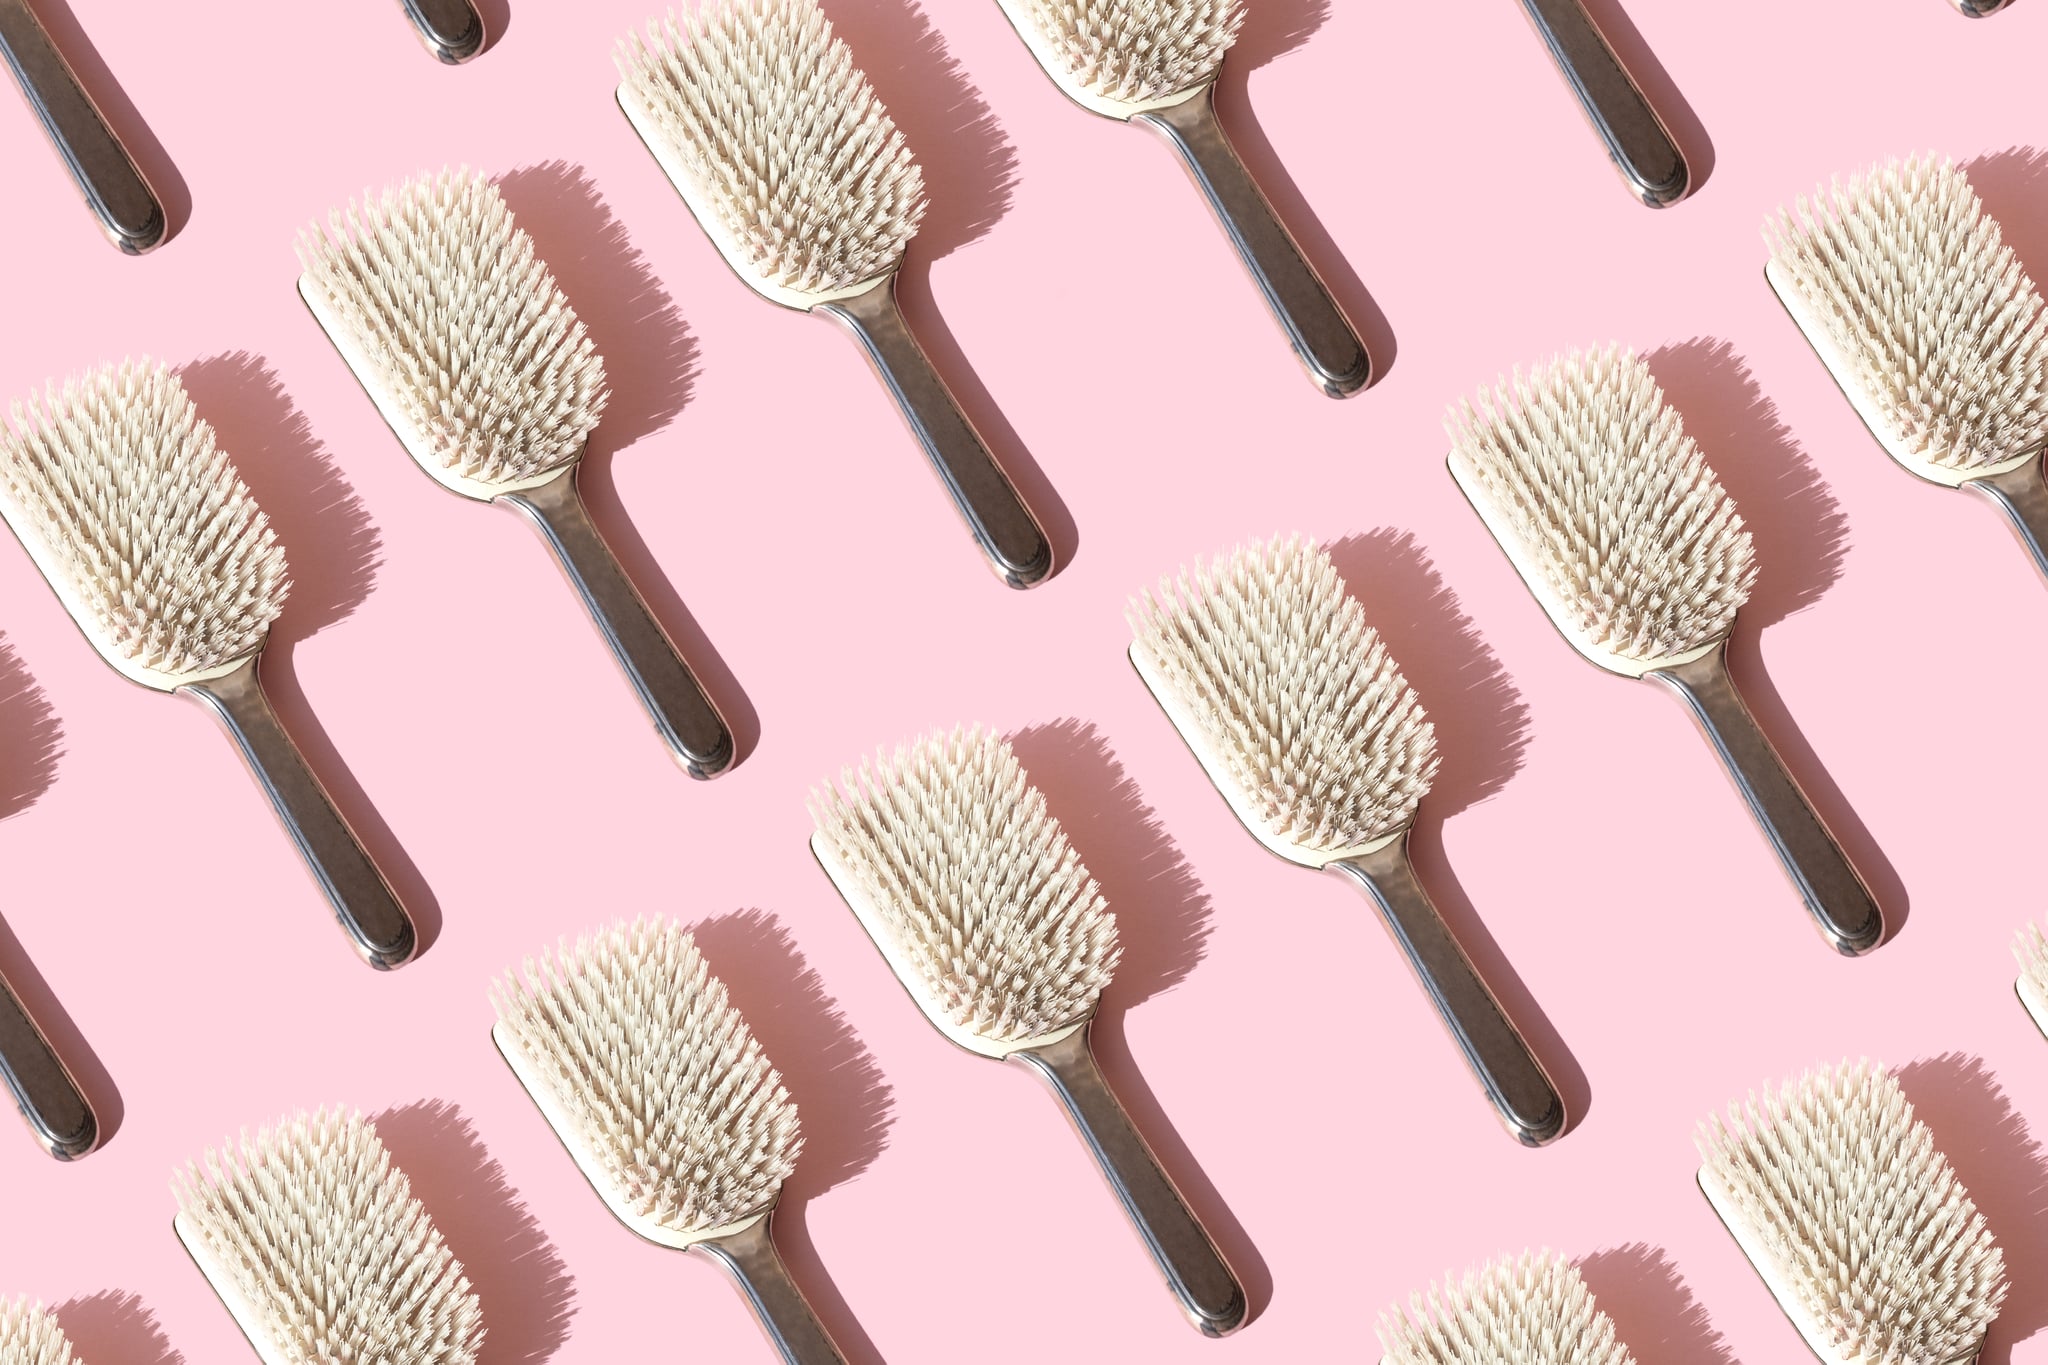 Experts reveal how often you should clean your hair brushes.